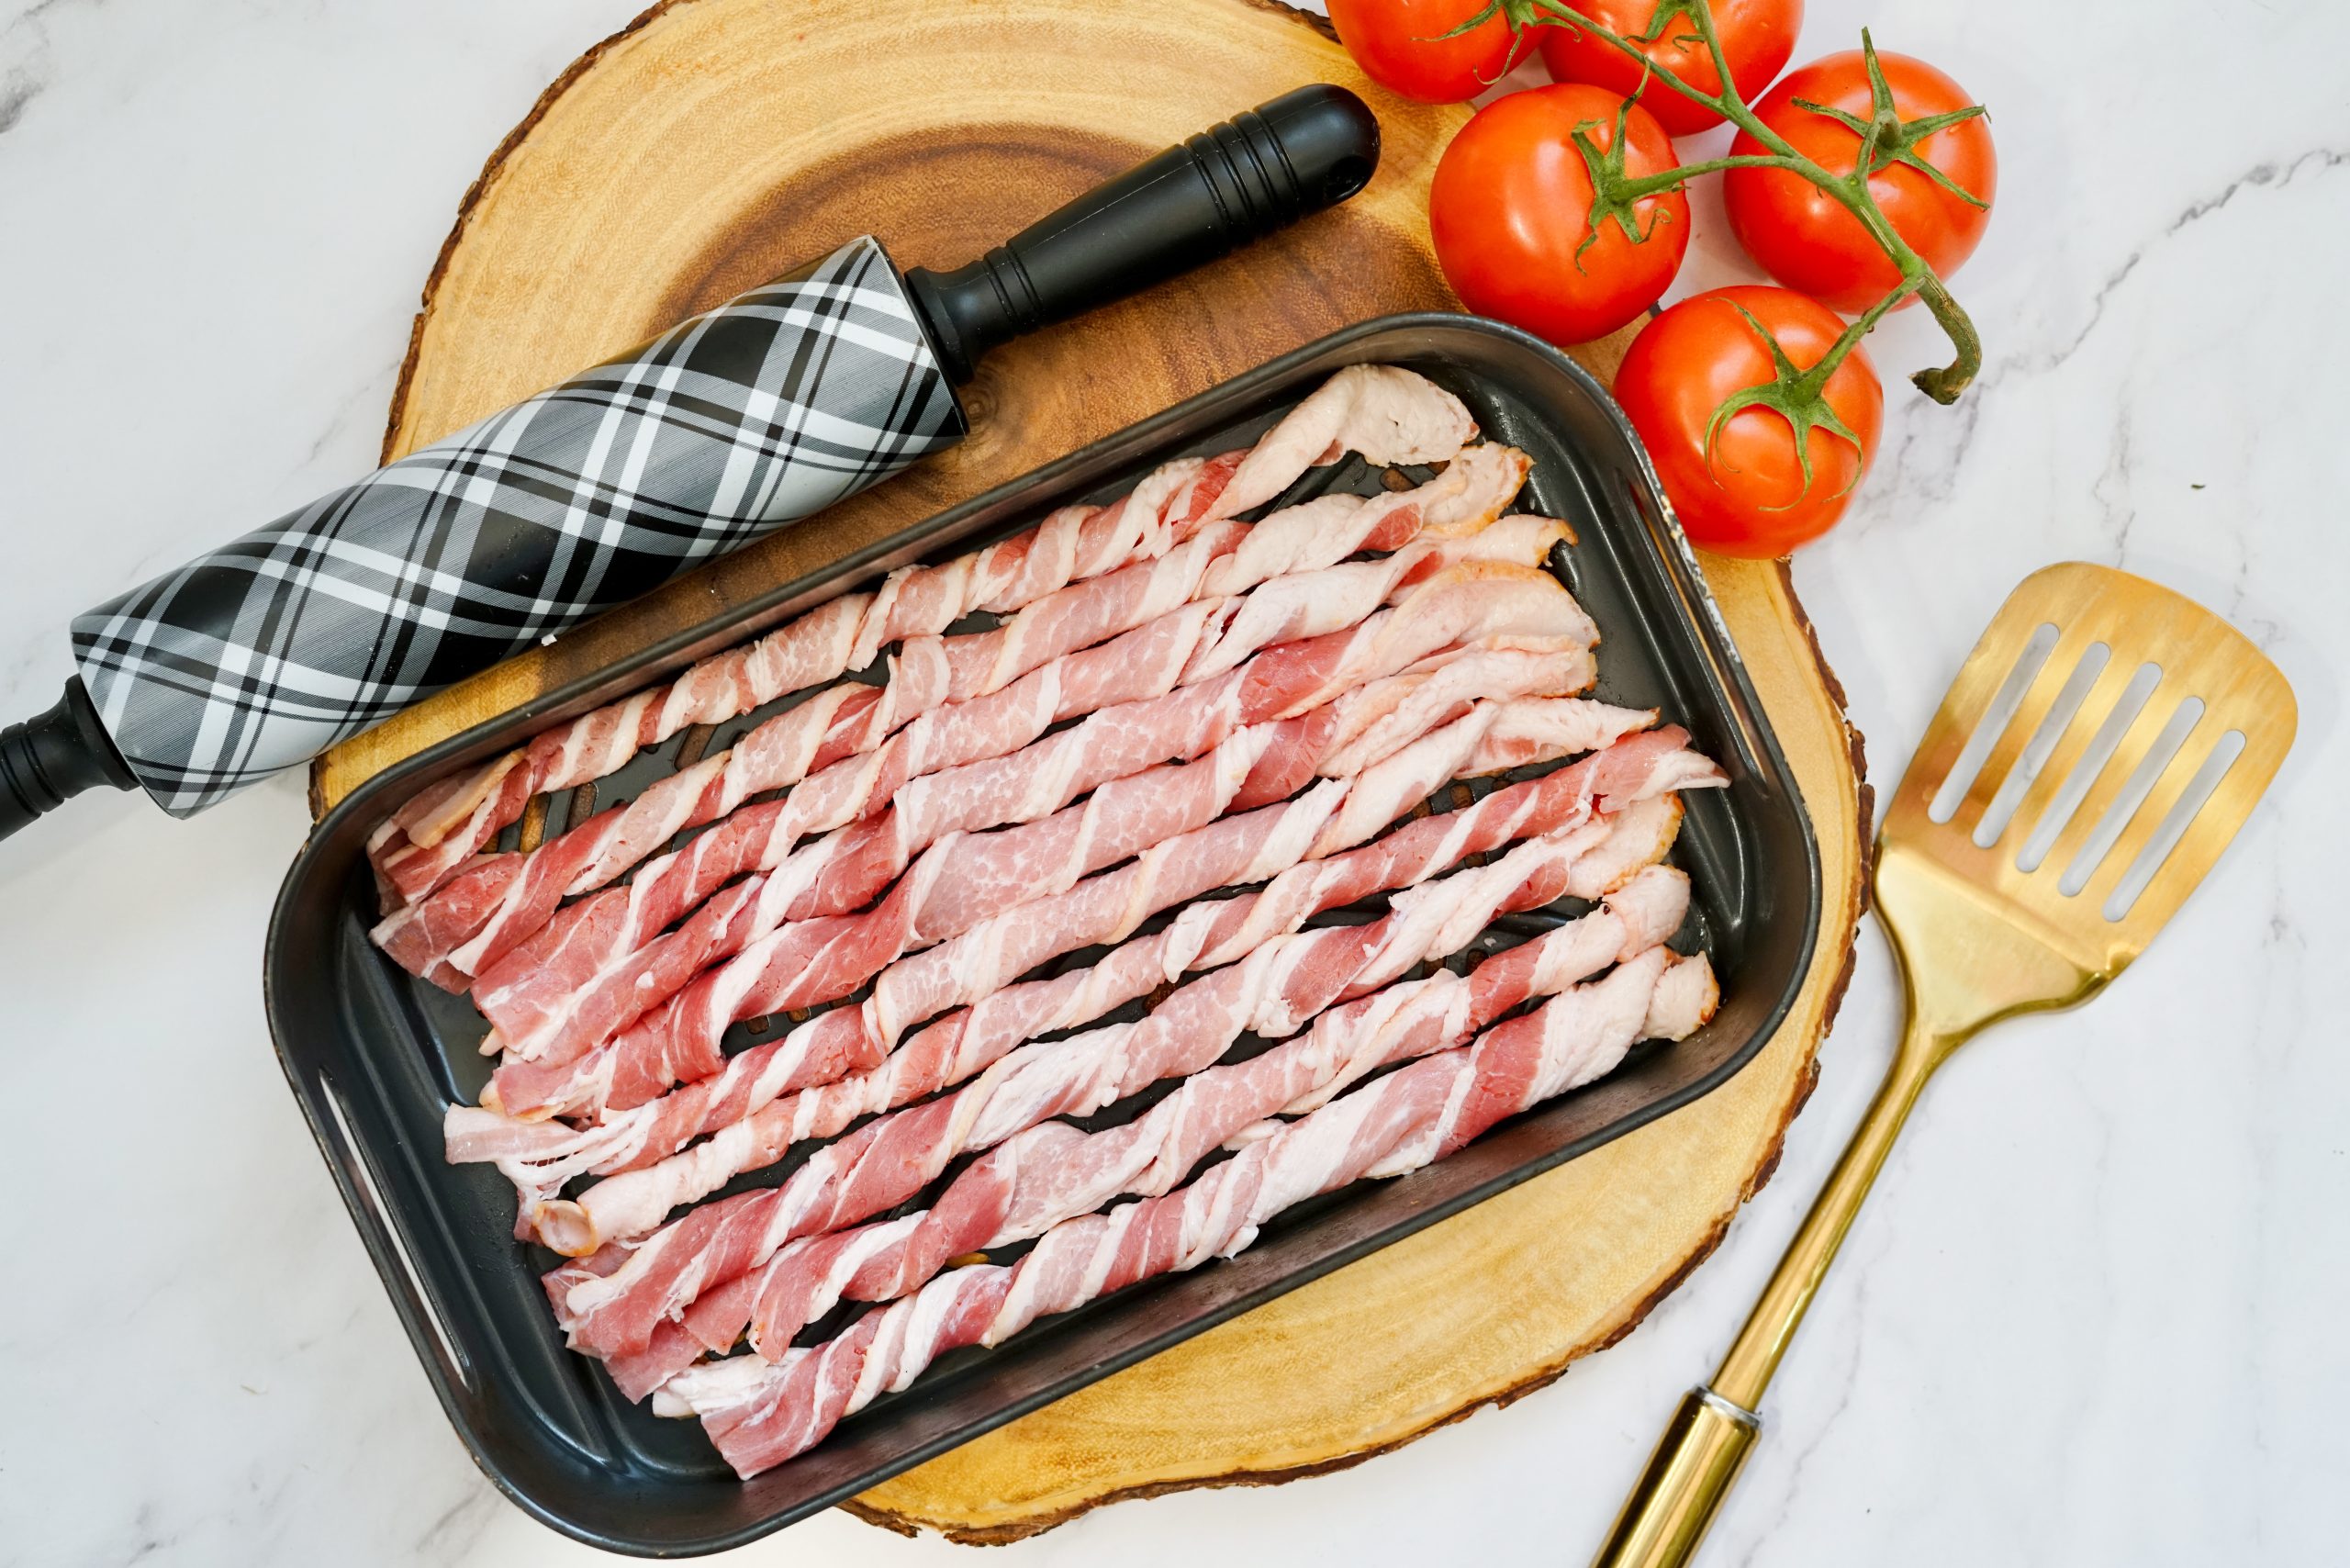 Uncooked bacon twists in an air fryer tray near kitchen tools.